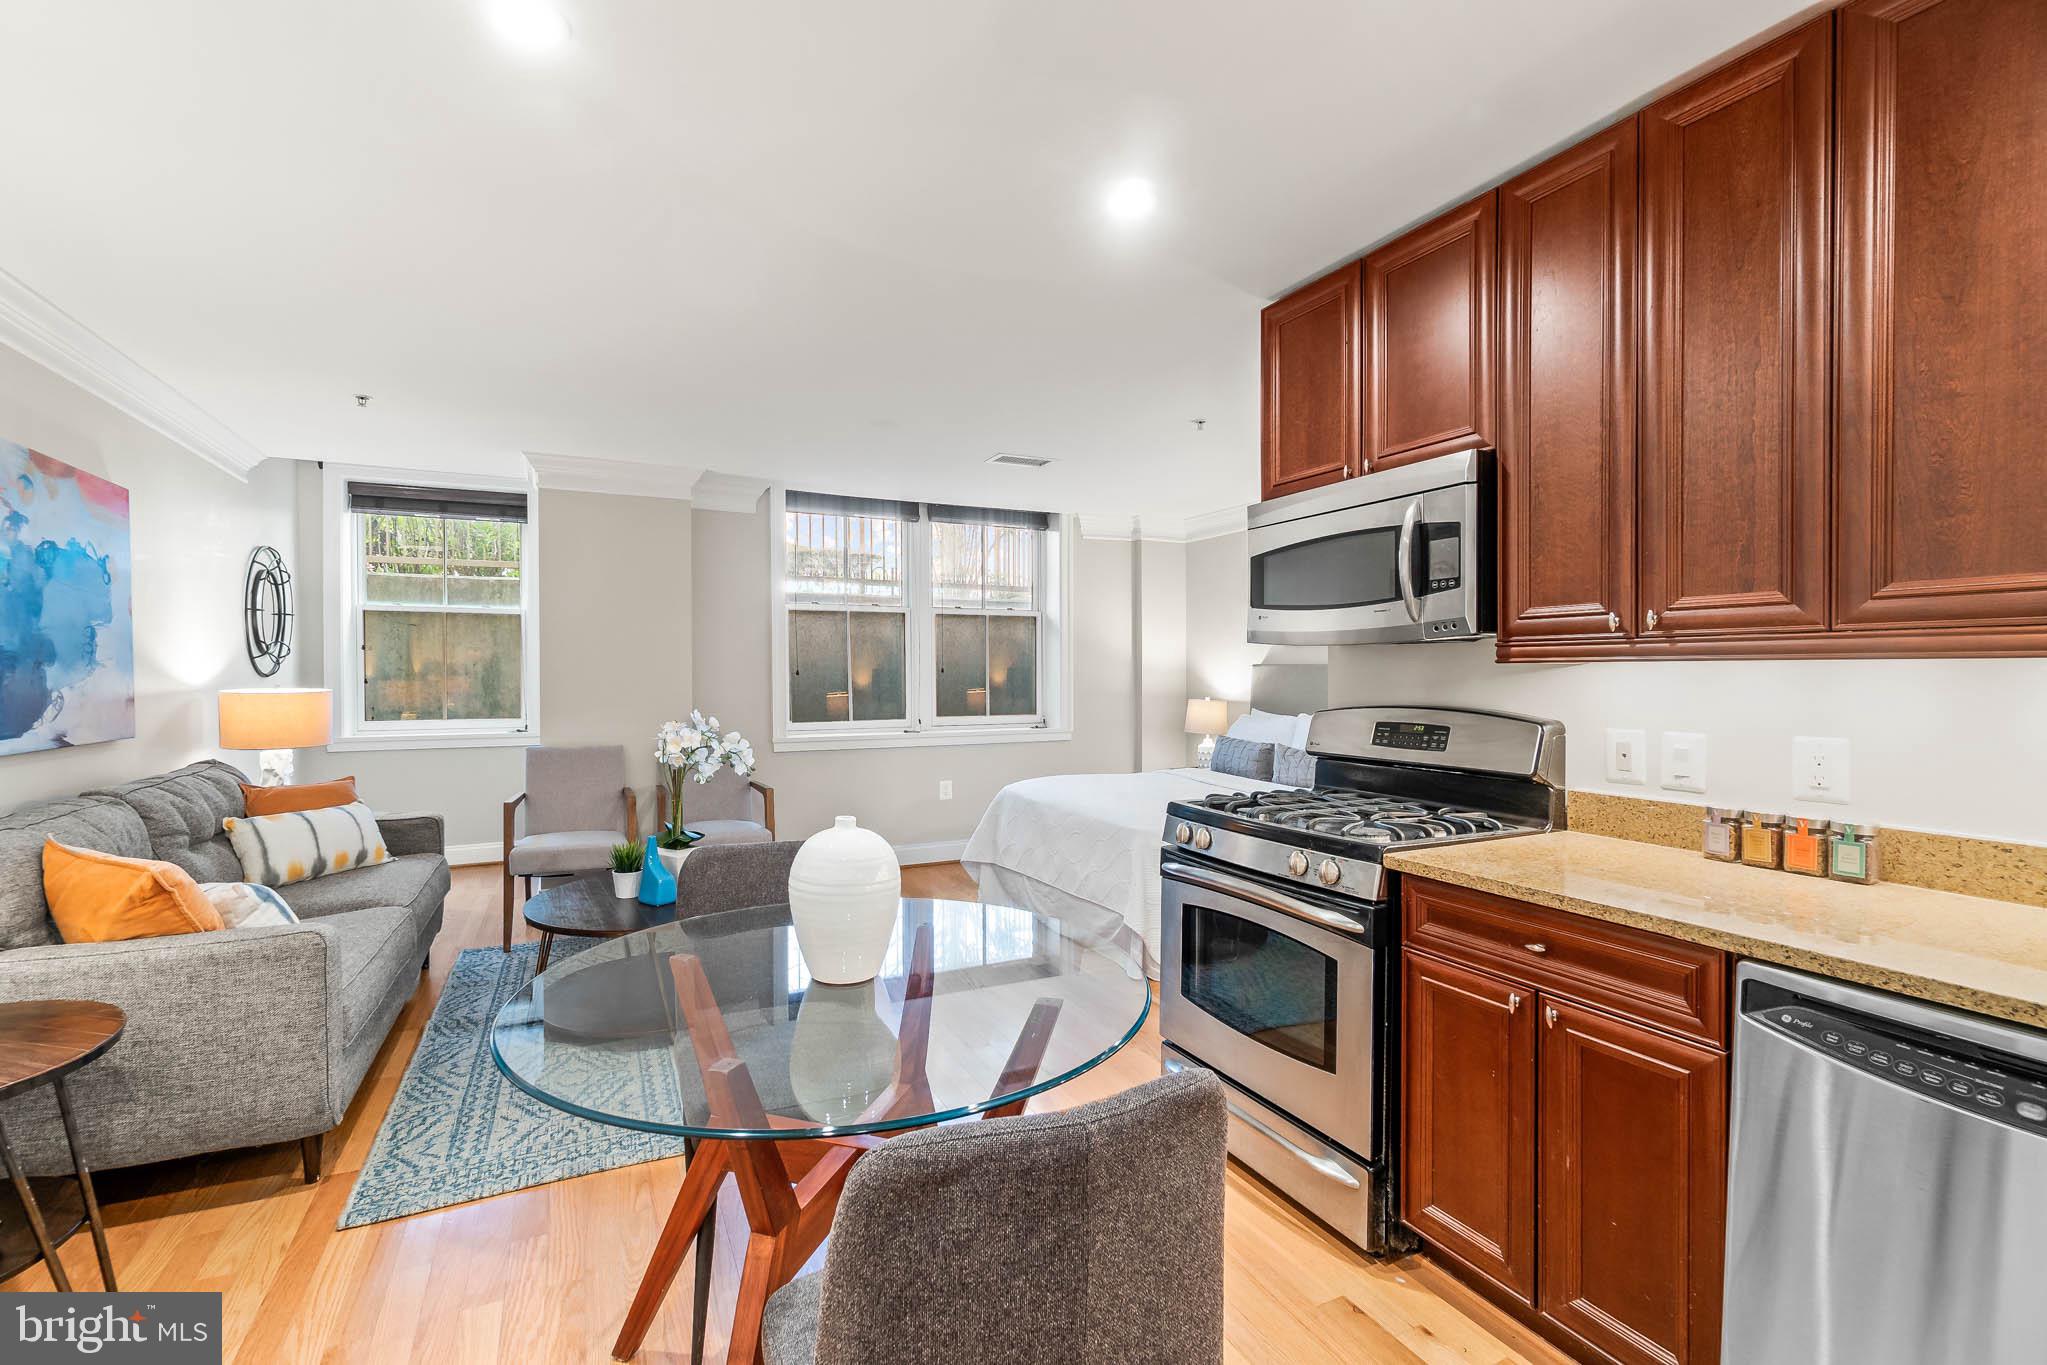 Live comfortably in this affordable studio at Logan Station: The entry-way leads to an eat-in kitche